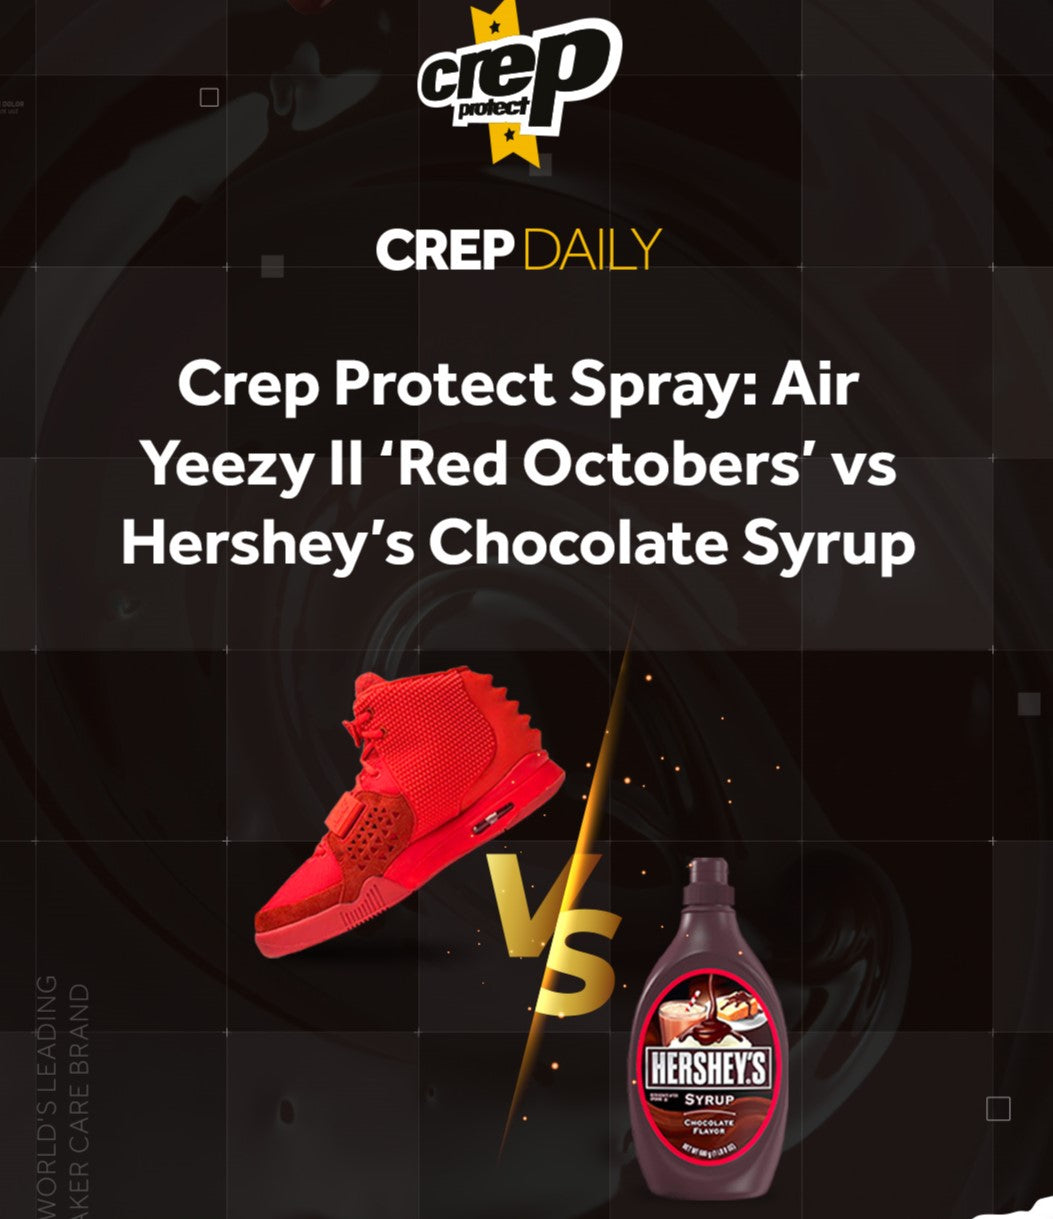 Crep Protect Spray: Air Yeezy II 'Red Octobers' vs Hershey's Chocolate –  CrepProtect